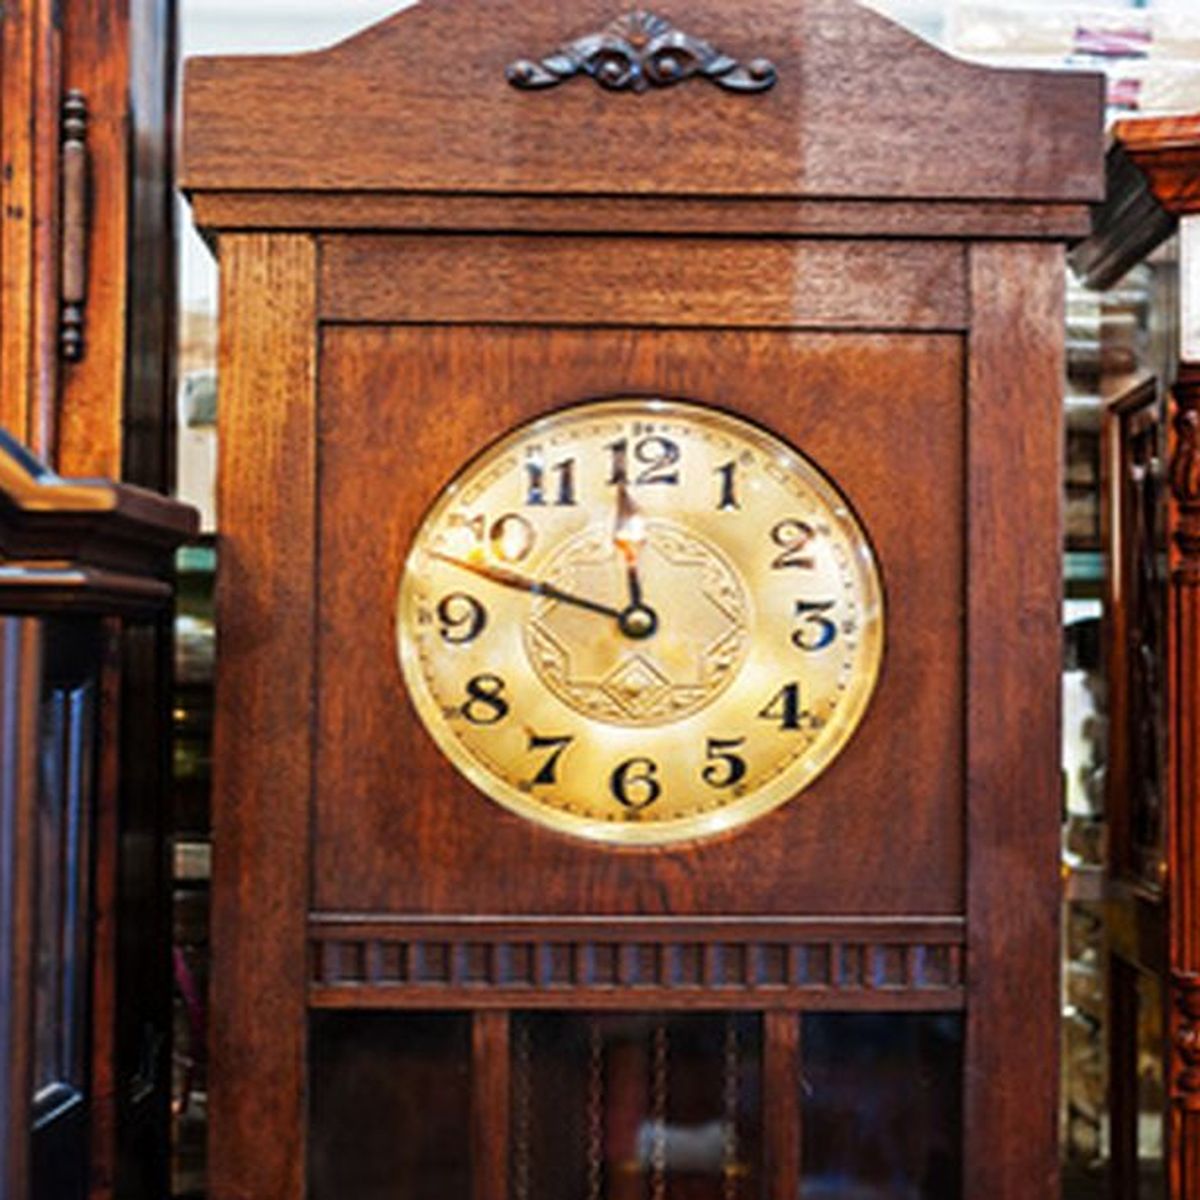 Things to Look for When Repairing a Grandfather Clock